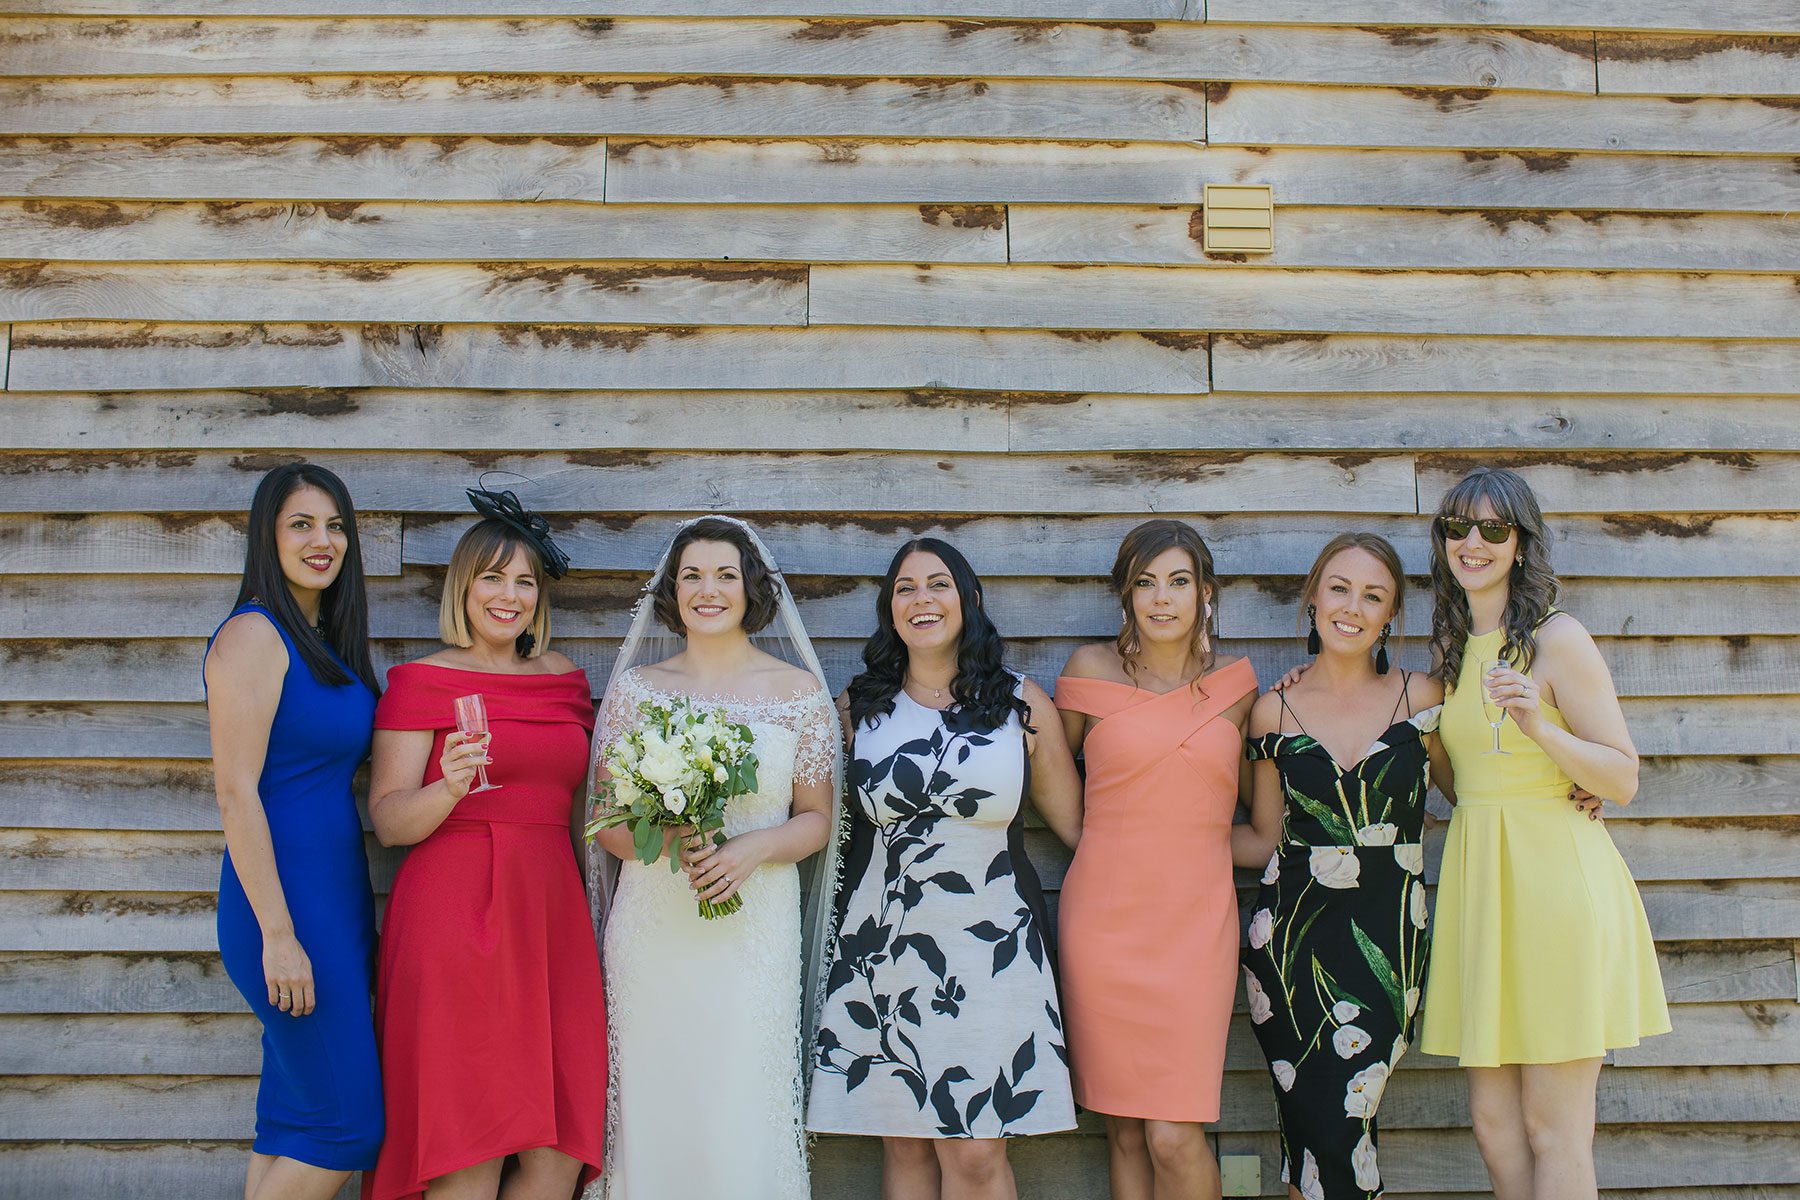 The friends - Reportage Wedding at Upcote Barn | Bullit